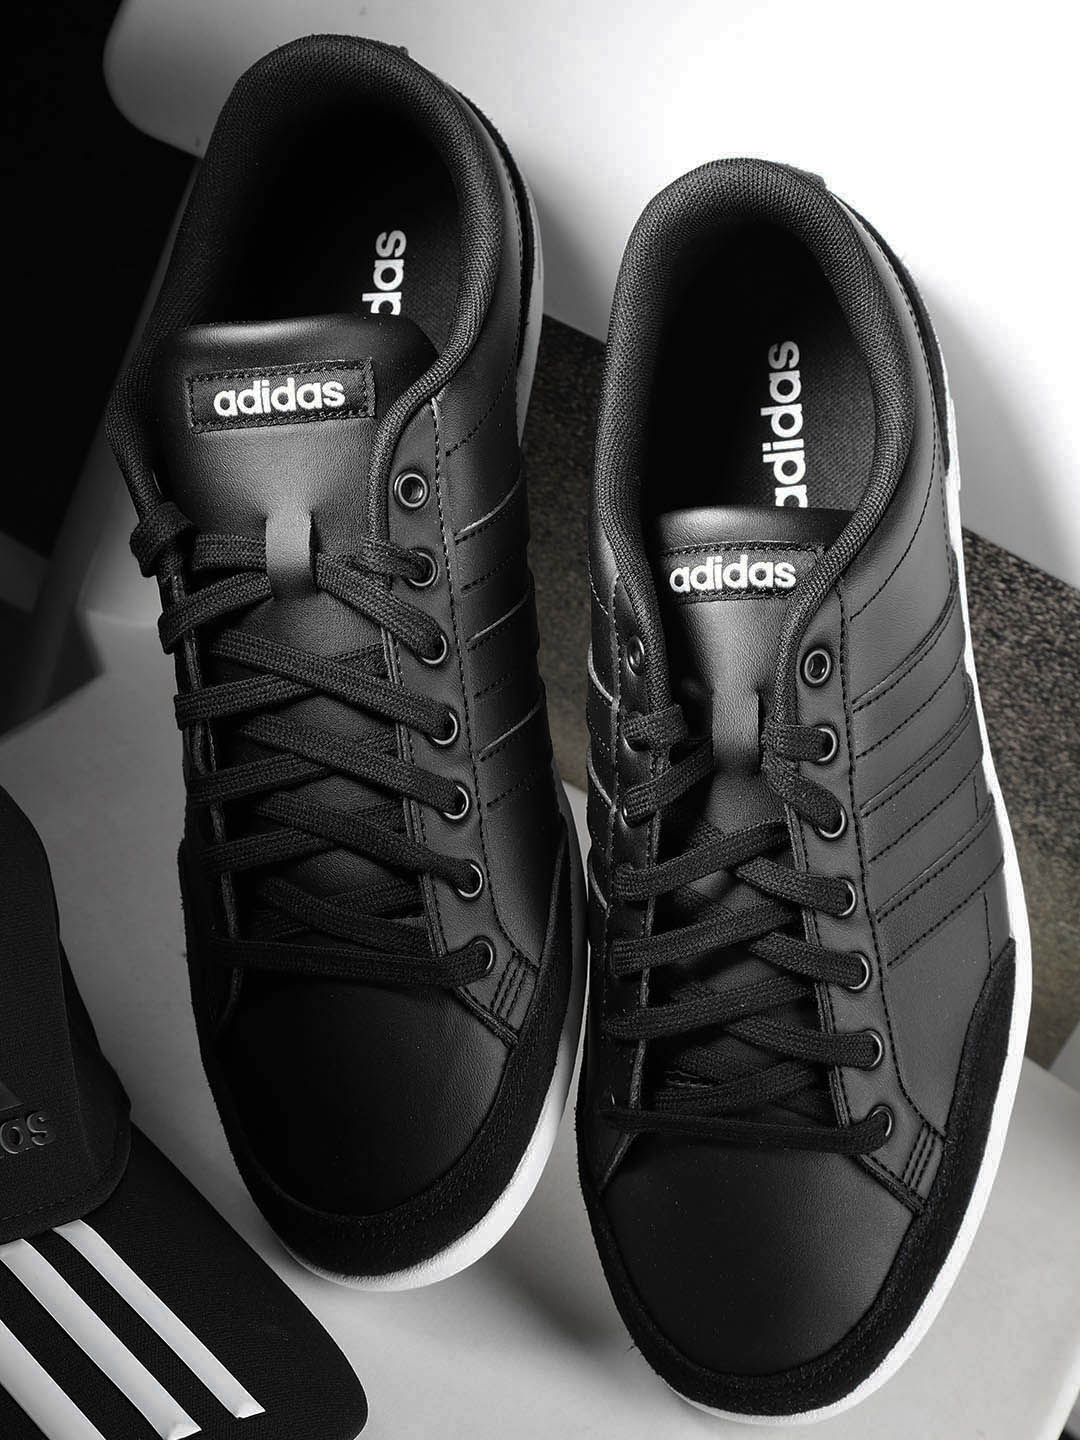 adidas caflaire nubuck mens trainers